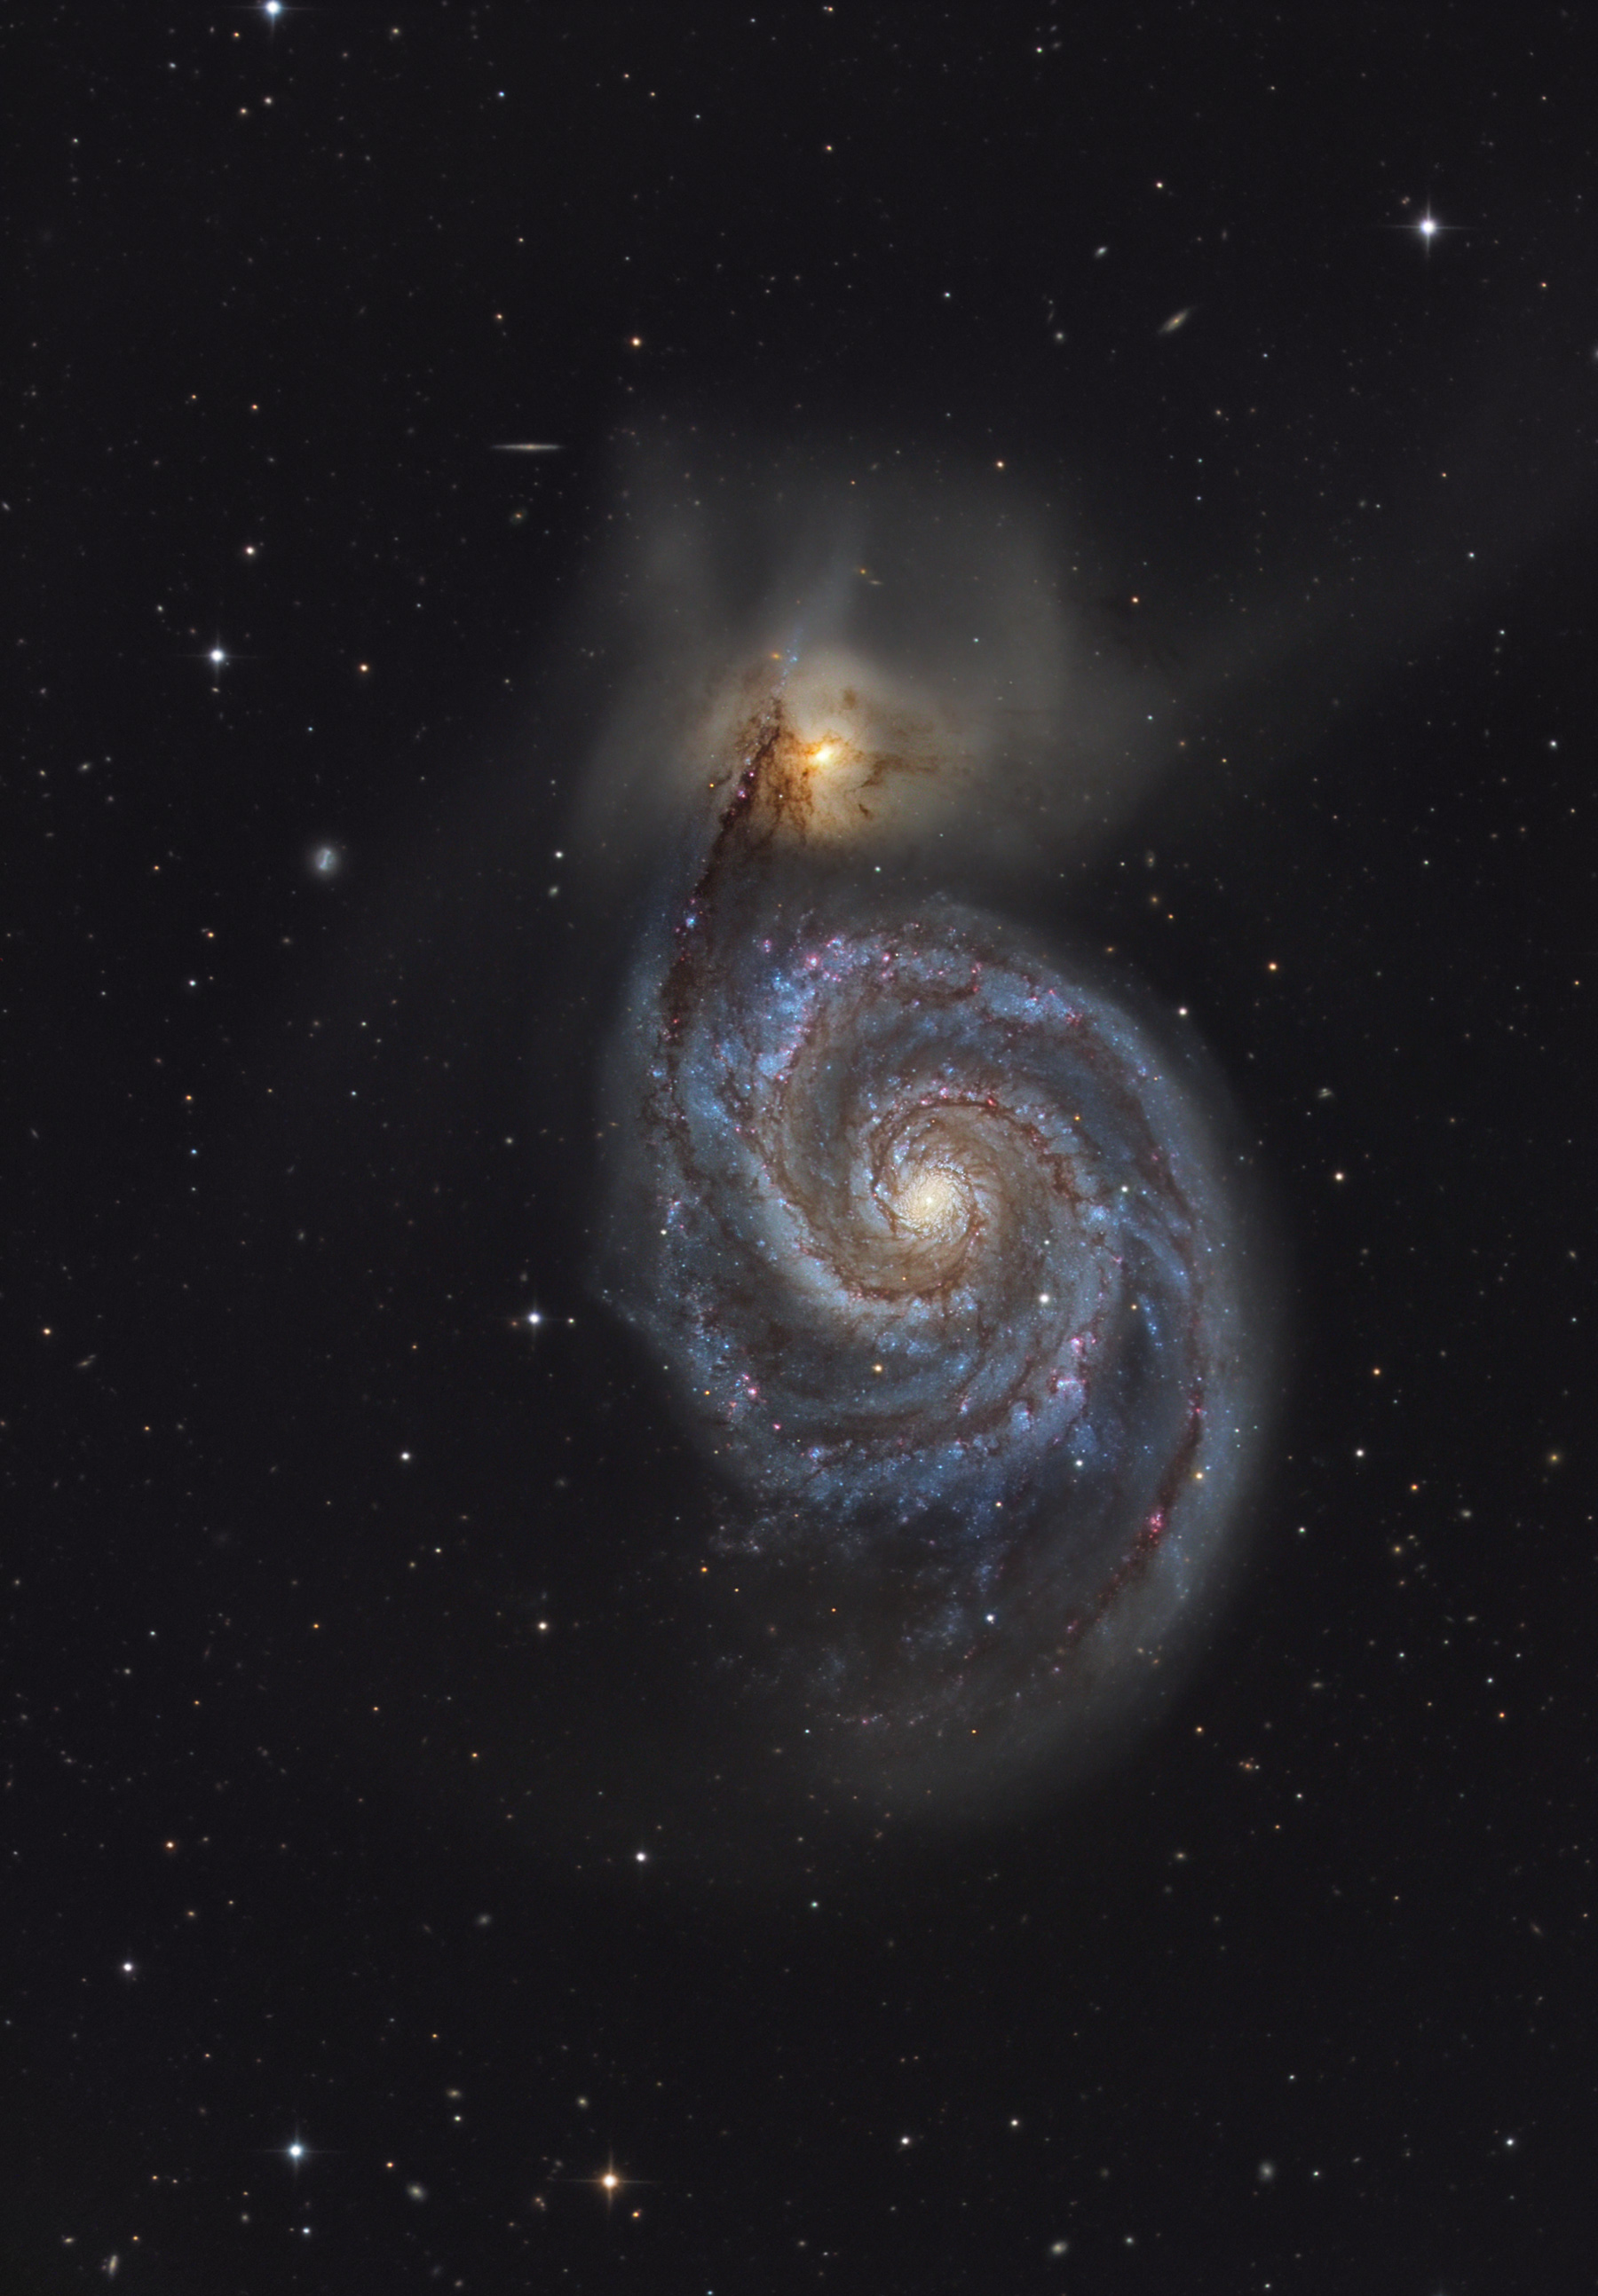 M51 with and without SN2011dh